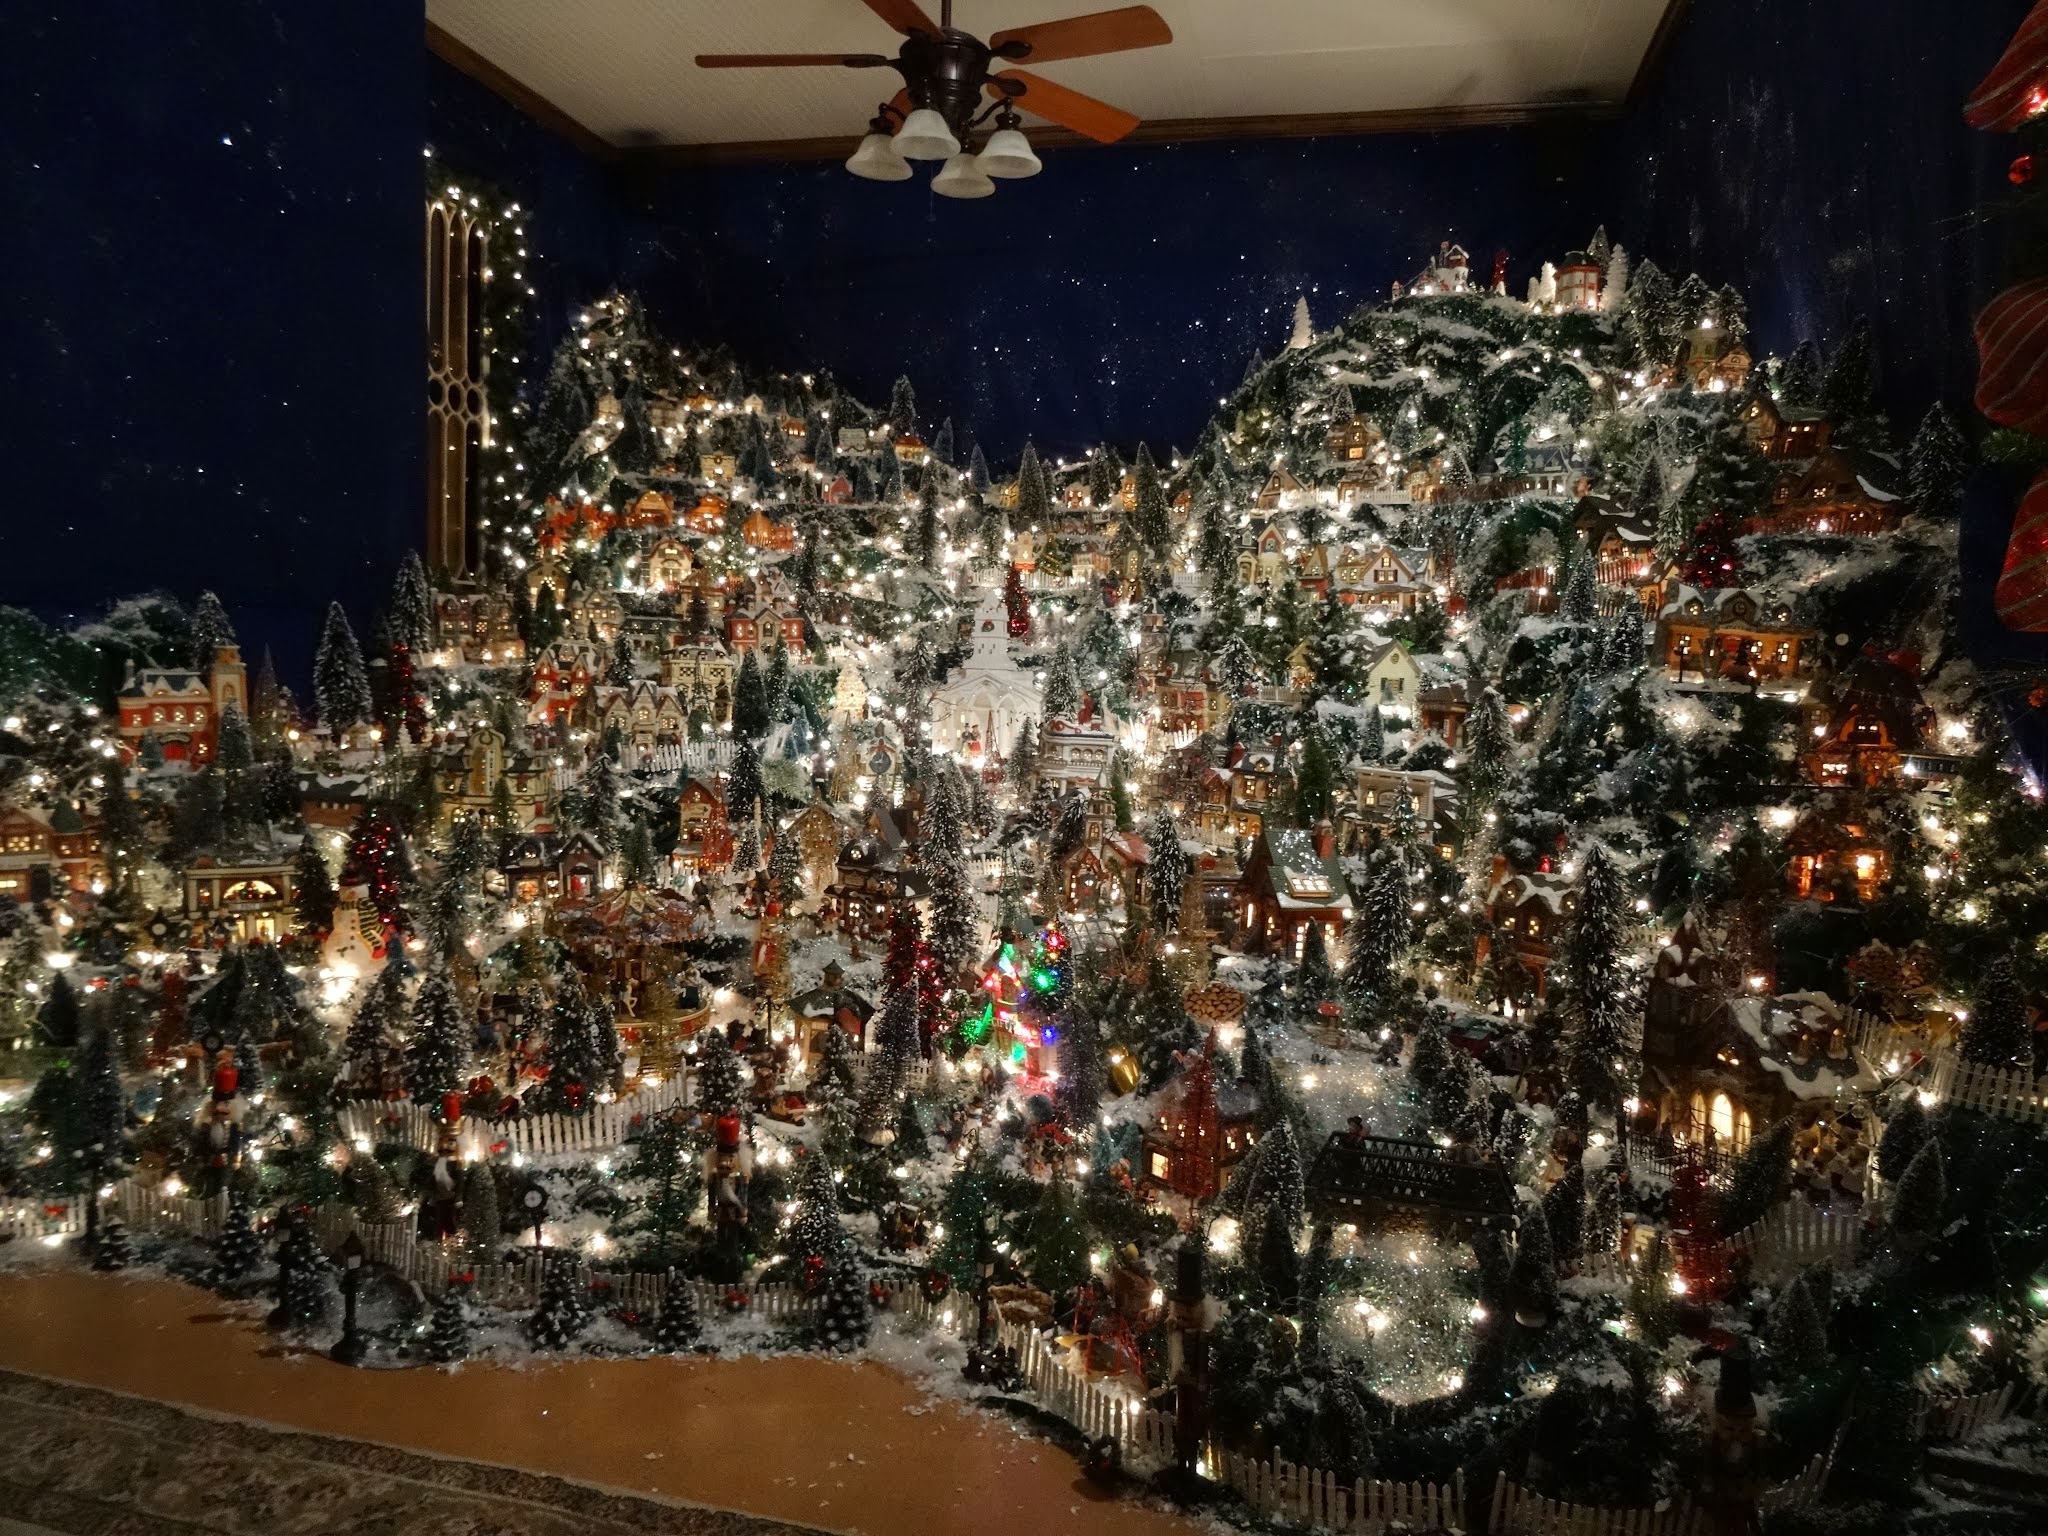 A little Christmas village my mom puts up for the Holidays - Imgur